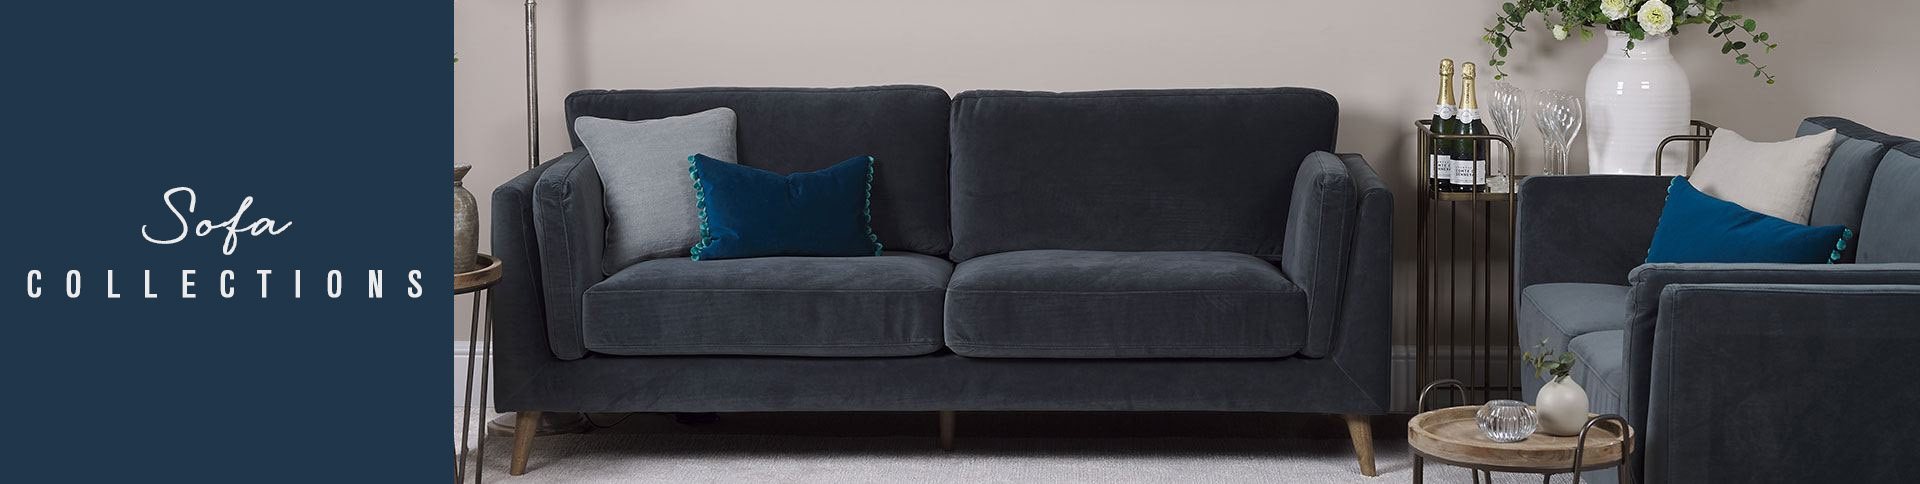 Sofa collections 